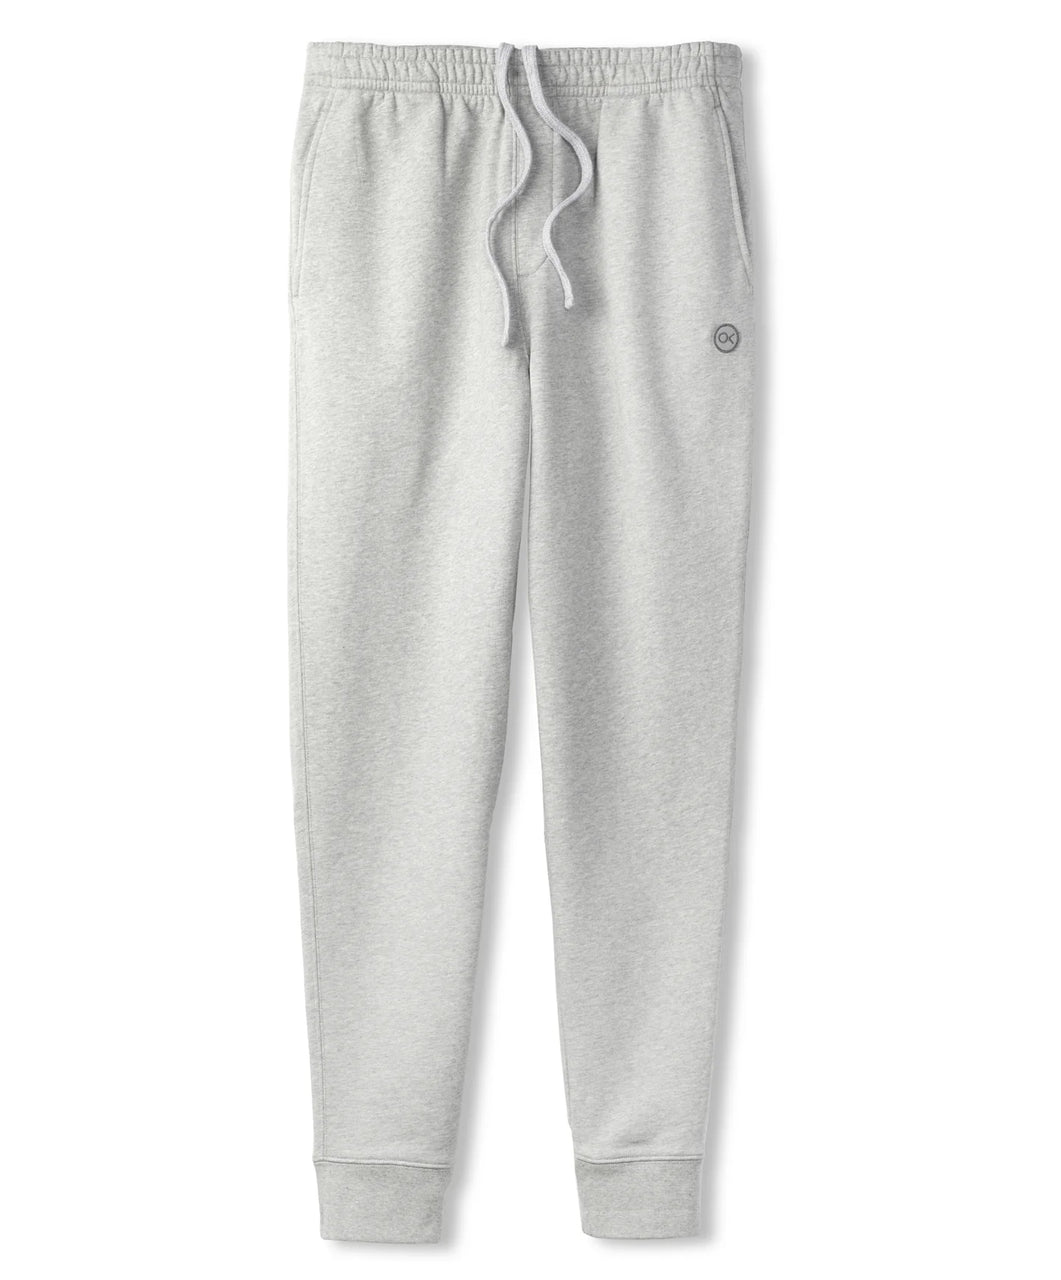 Outerknown Sunday Sweatpants - Heather Grey